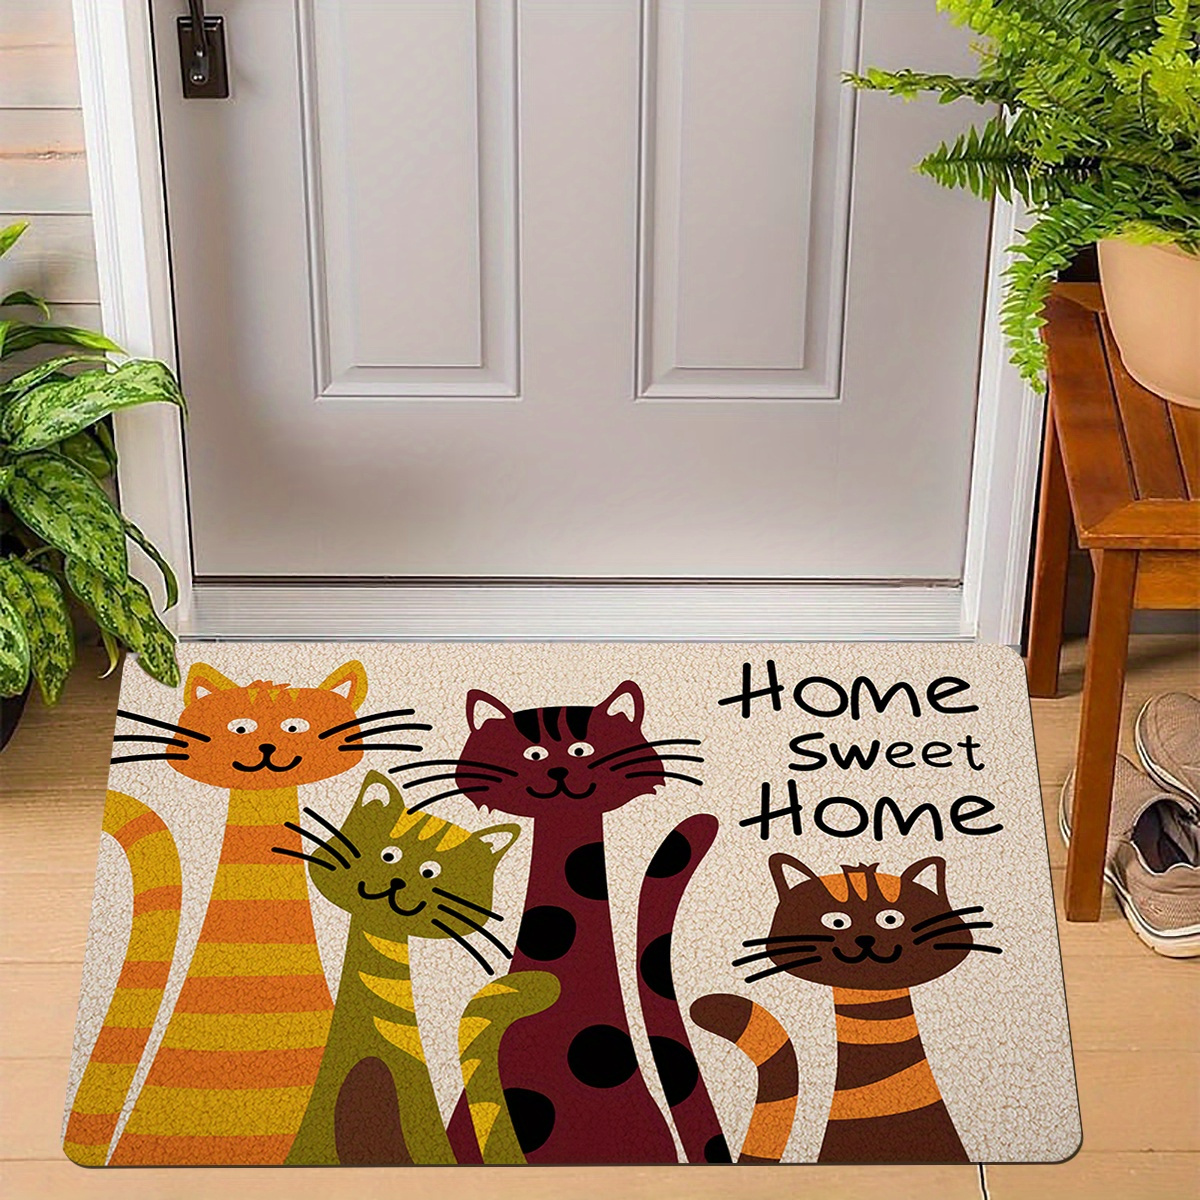 

charming Kitty" Cute Cartoon Kitten & Letter Print Door Mat - Anti-slip, Stain-resistant Polyester With Soft Sponge Backing For Kitchen, Entryway, Living Room, Balcony - Perfect For Home Decor